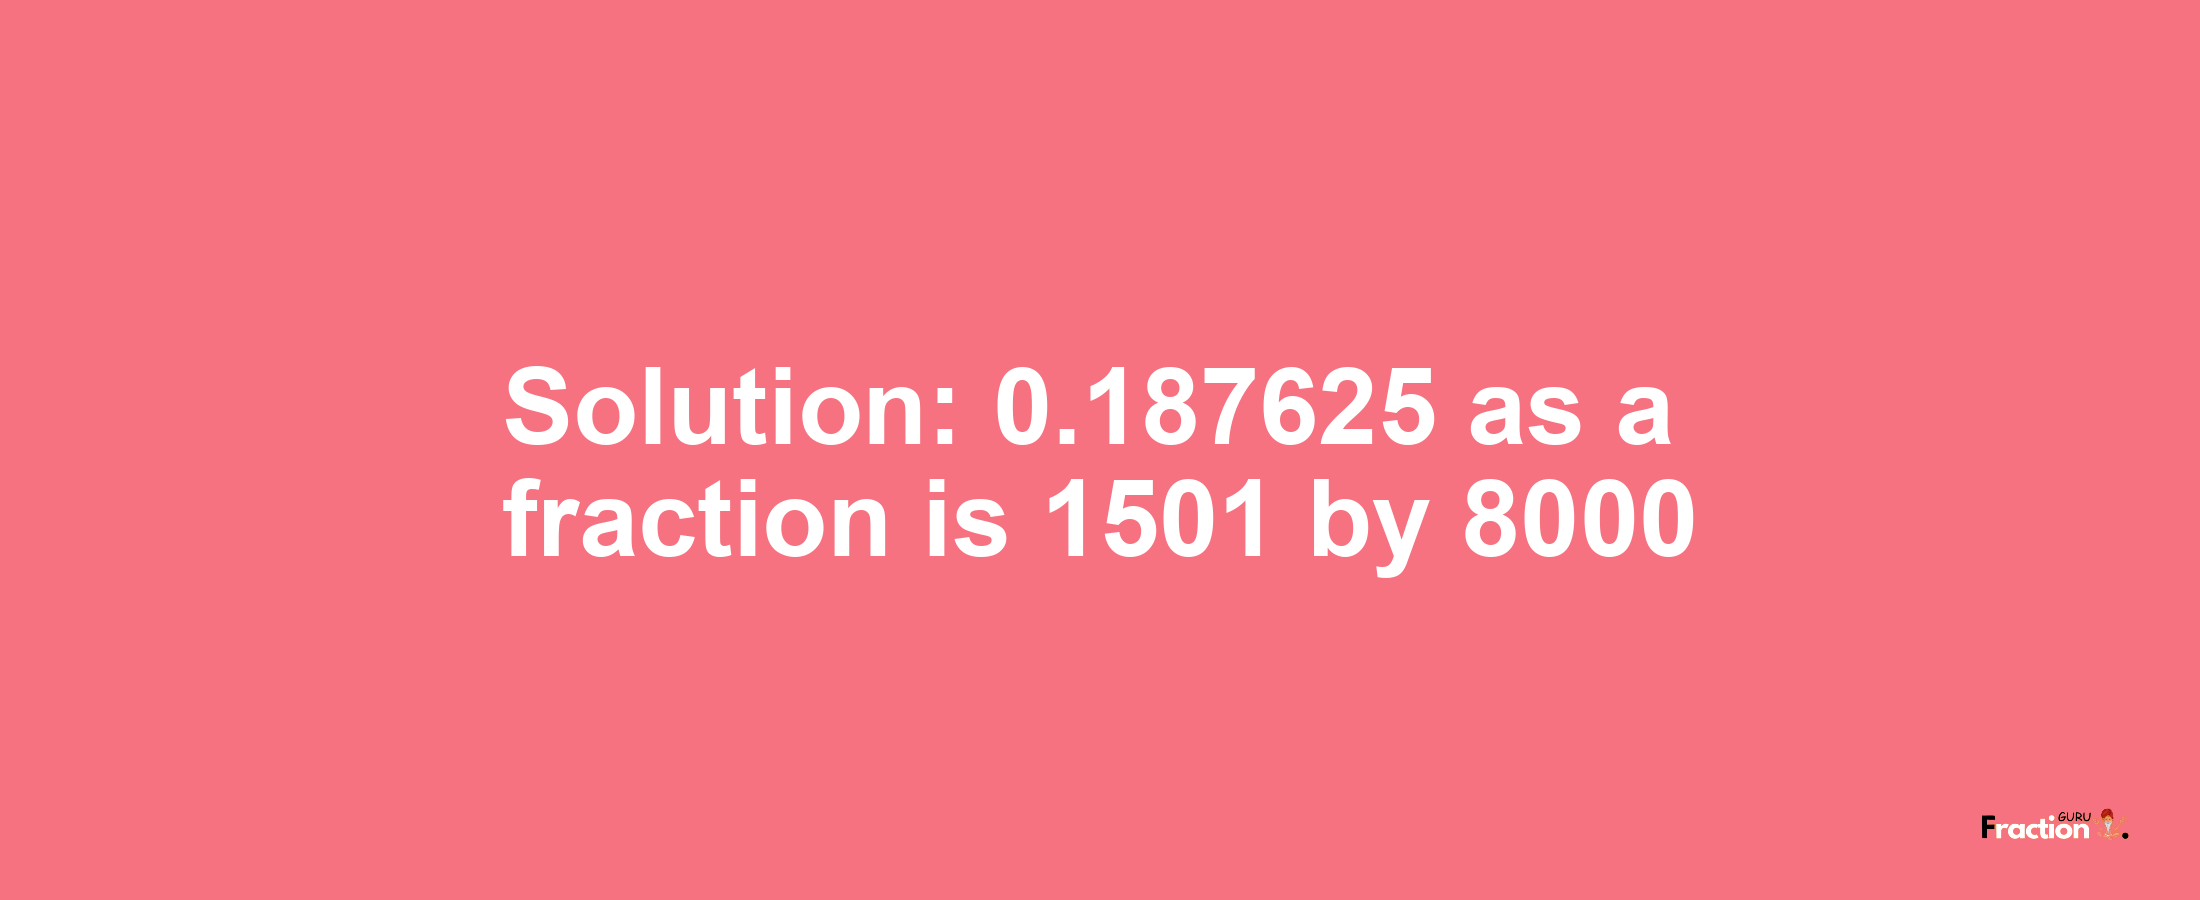 Solution:0.187625 as a fraction is 1501/8000